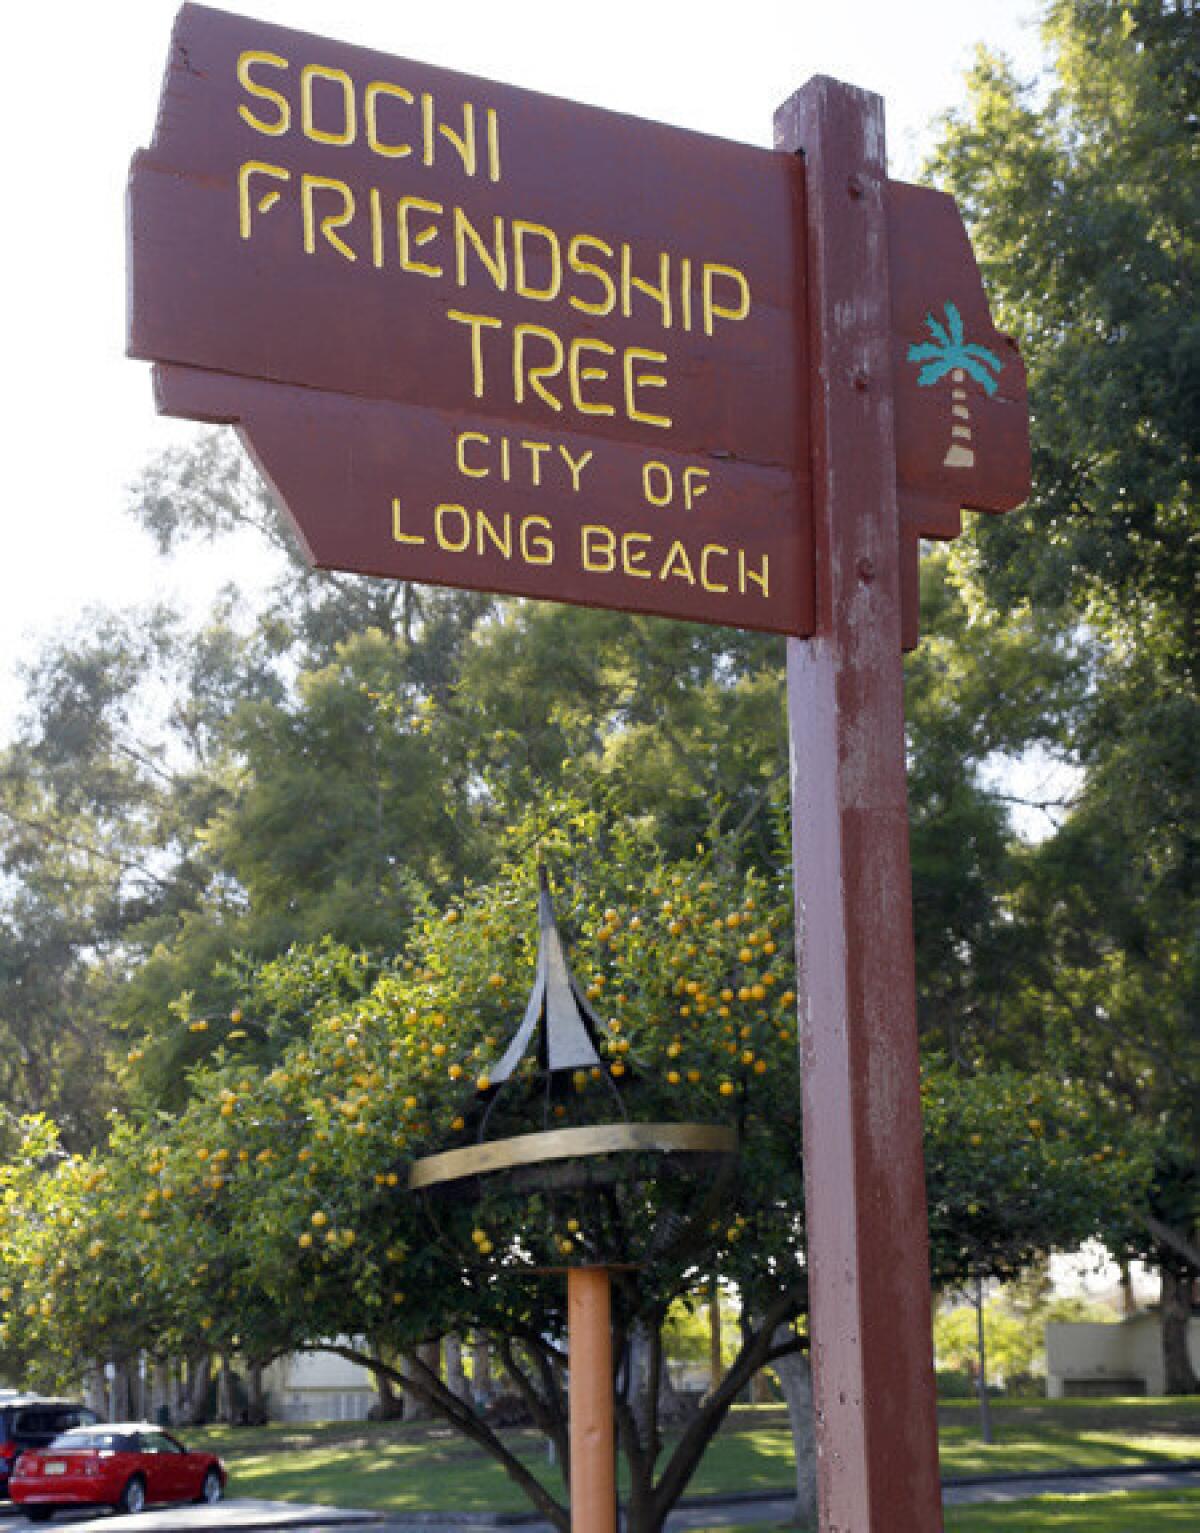 The Sochi Friendship Tree resides in Long Beach's Recreation Park. The metal object by the lemon tree is a peach pole.